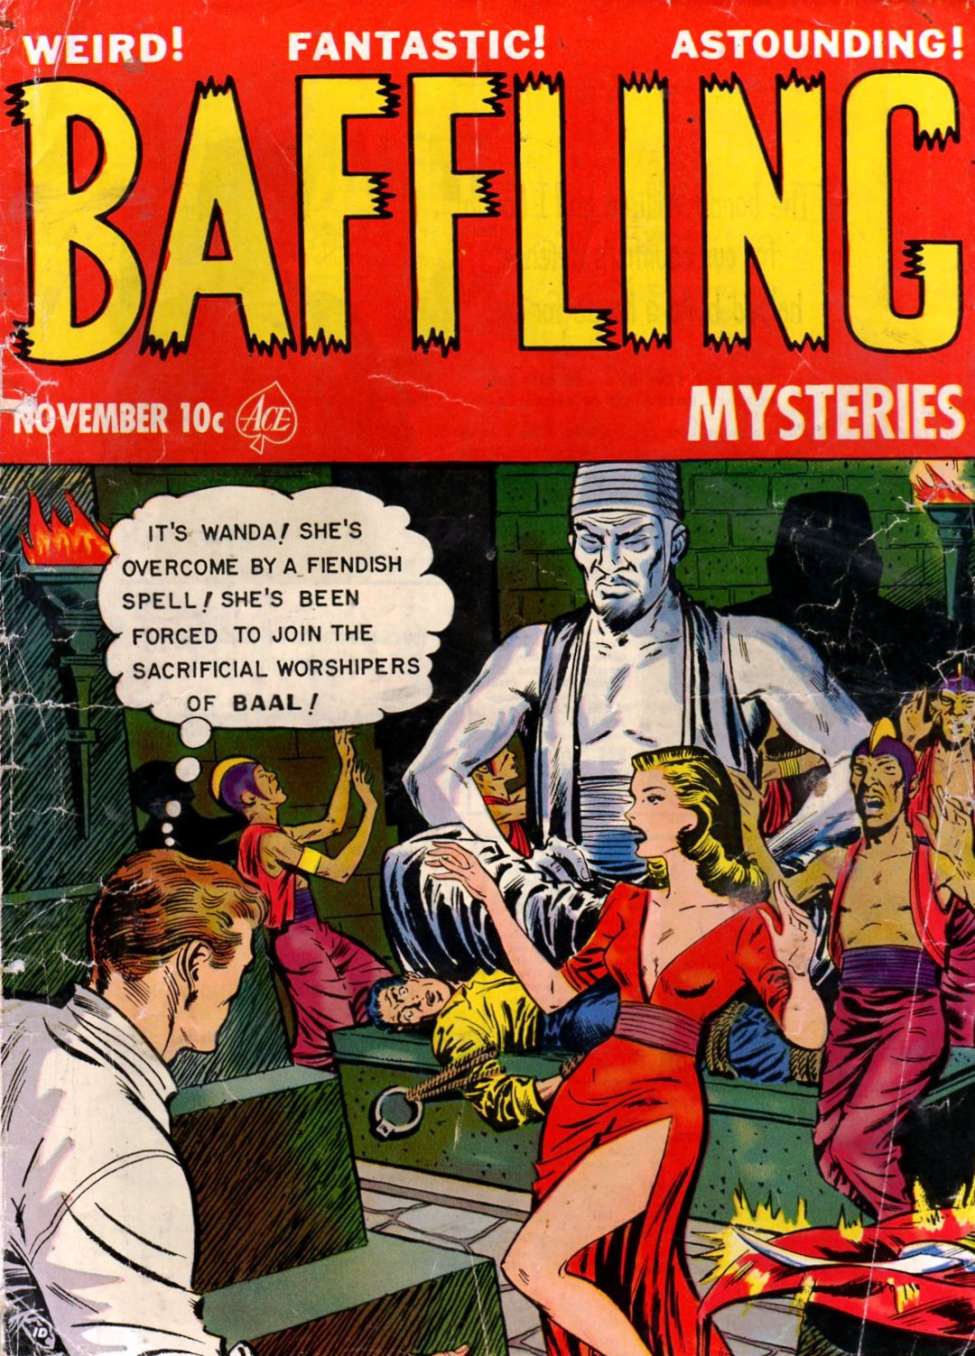 Comic Book Cover For Baffling Mysteries 11